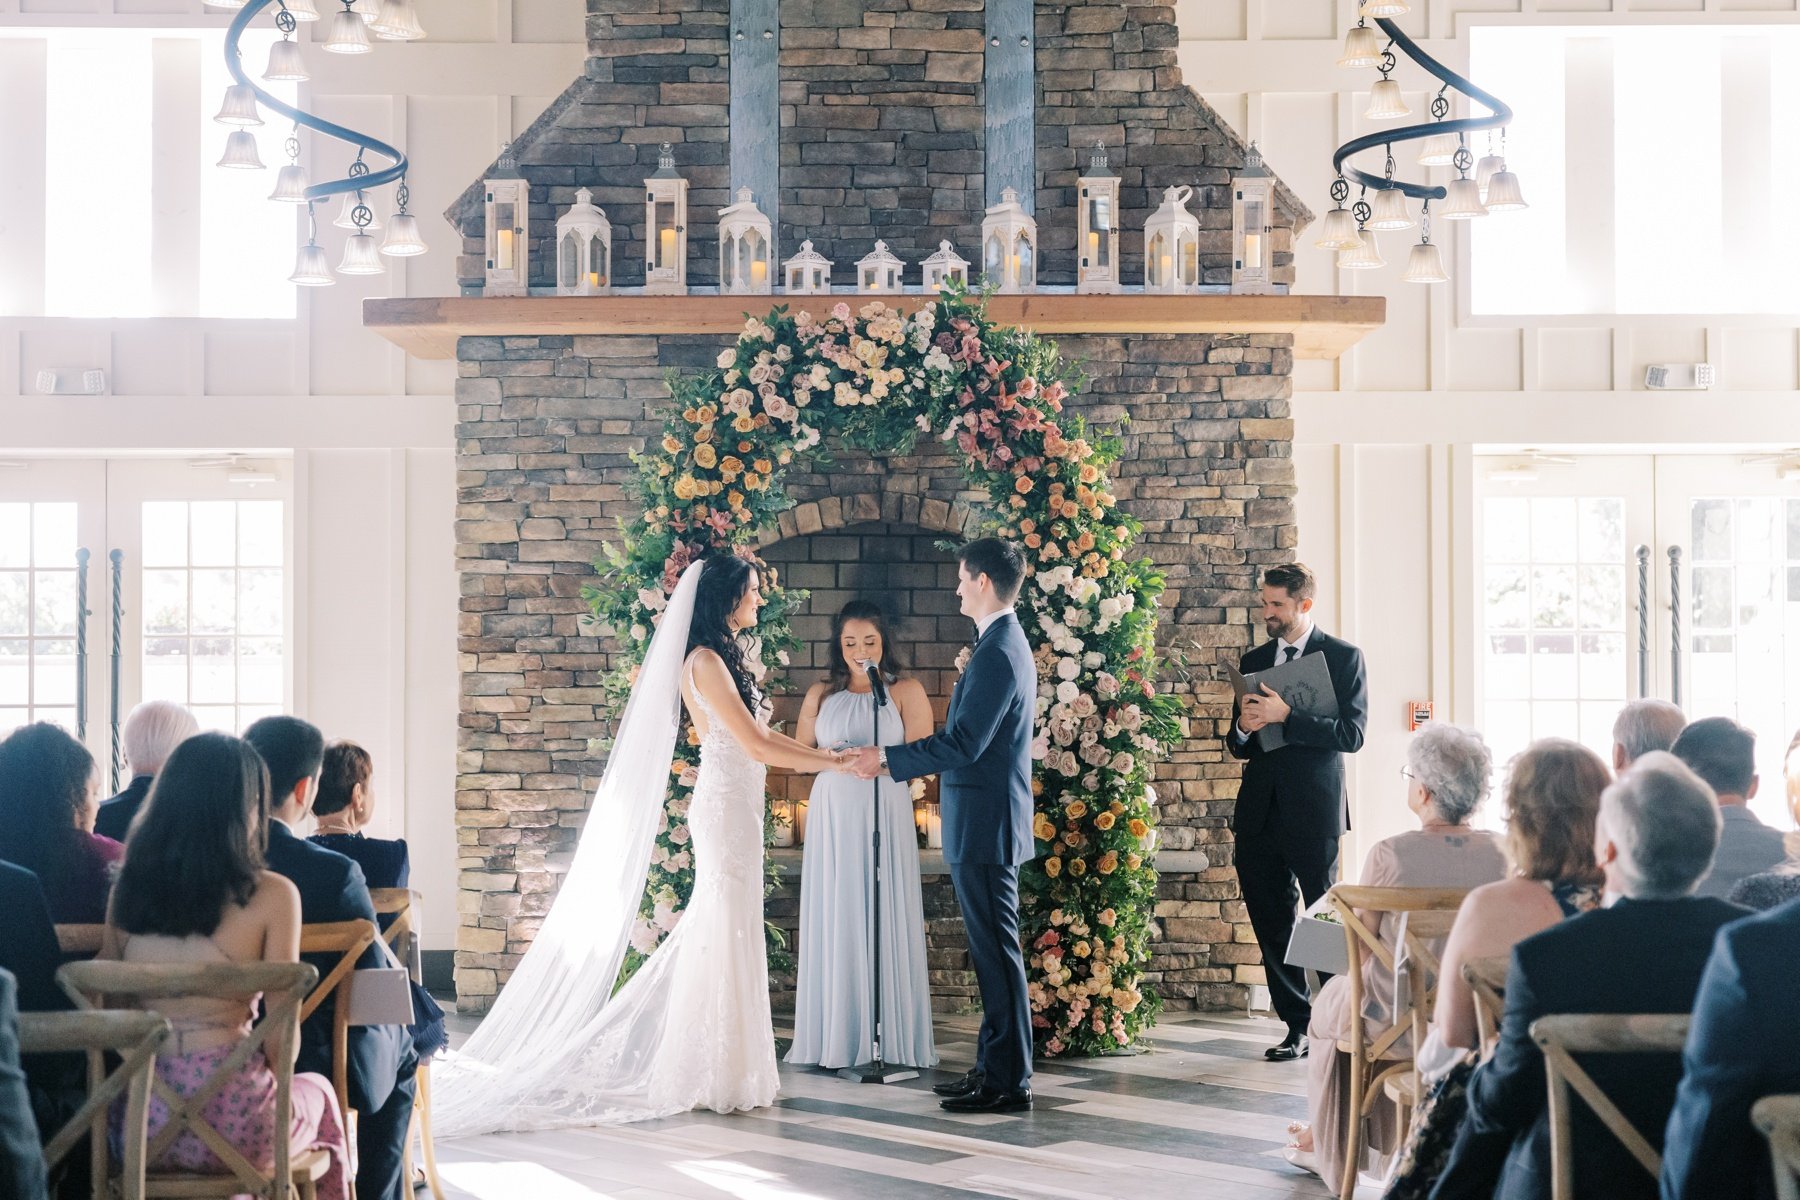 Wedding ceremony in the Coach House at The Ryland Inn